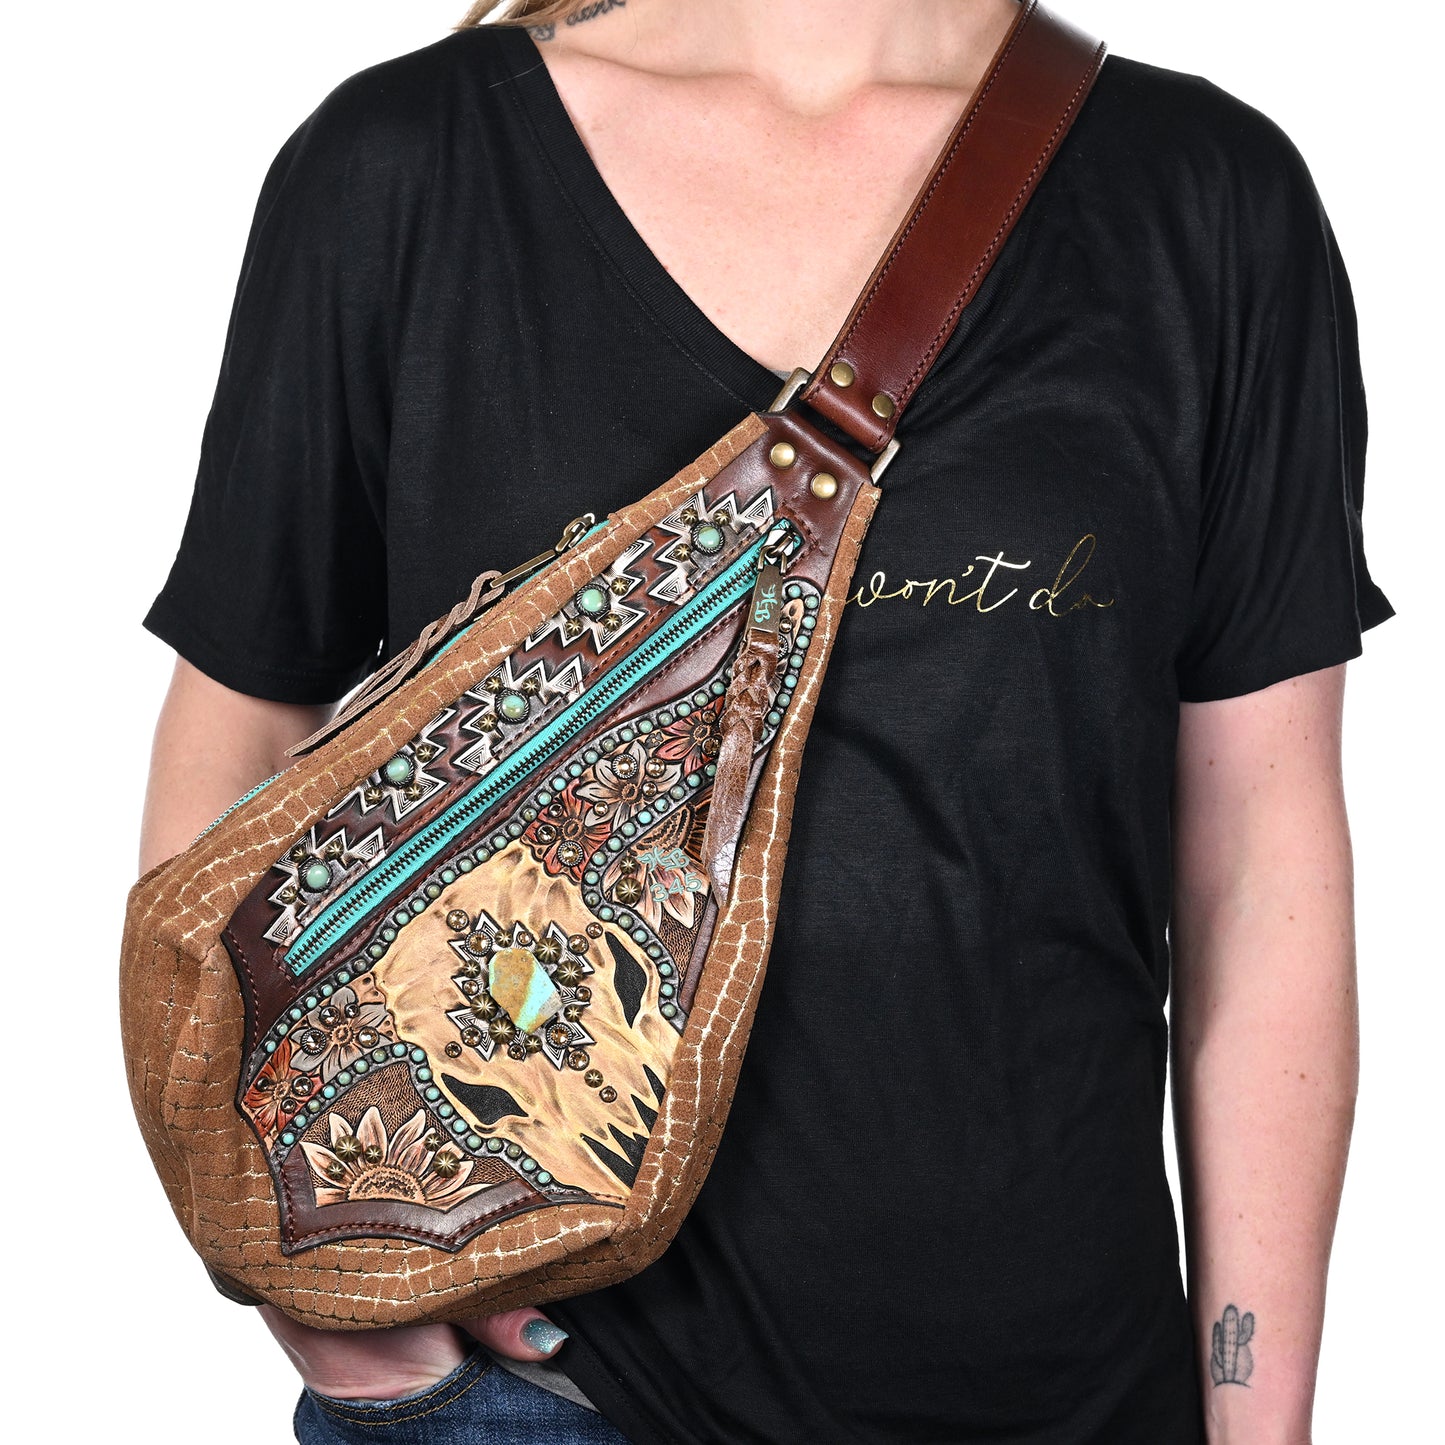 
                  
                    A person wearing a black t-shirt with cursive text displaying a large, patterned Heritage Brand fyra bag #345.
                  
                